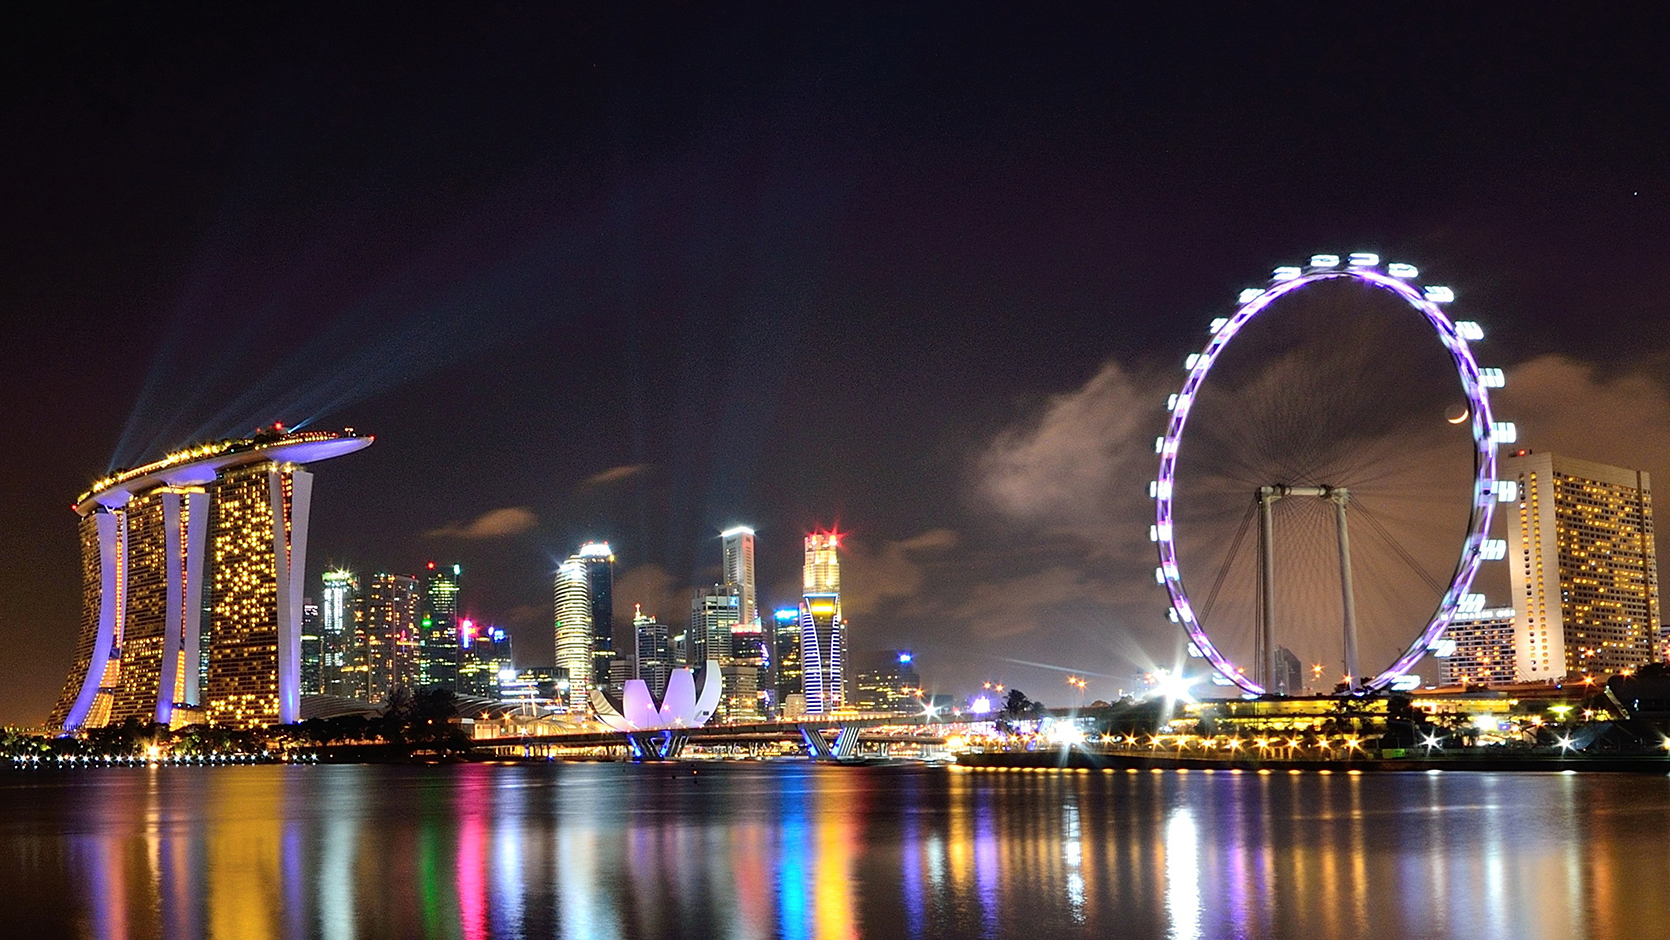 Singapore Flyer: Stunning Views of Singapores Skyline - Visit Singapore  Official Site